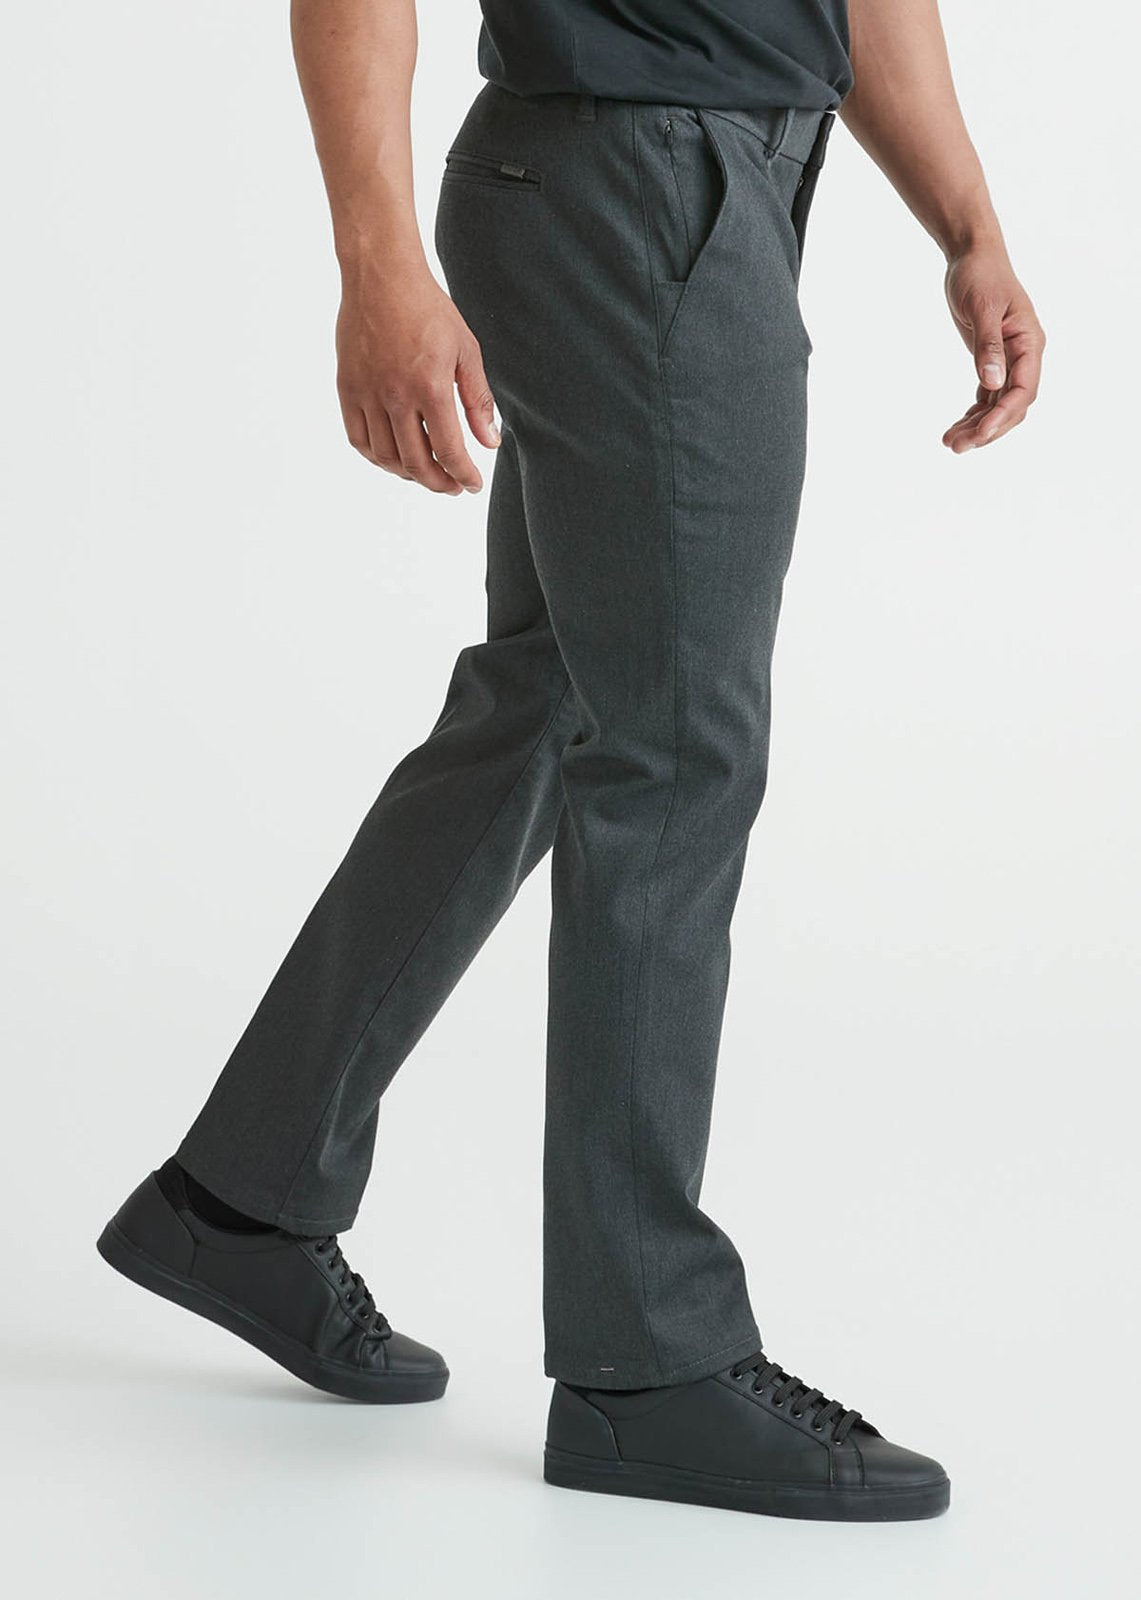 Men's Charcoal Relaxed Fit Stretch Dress Pant Side